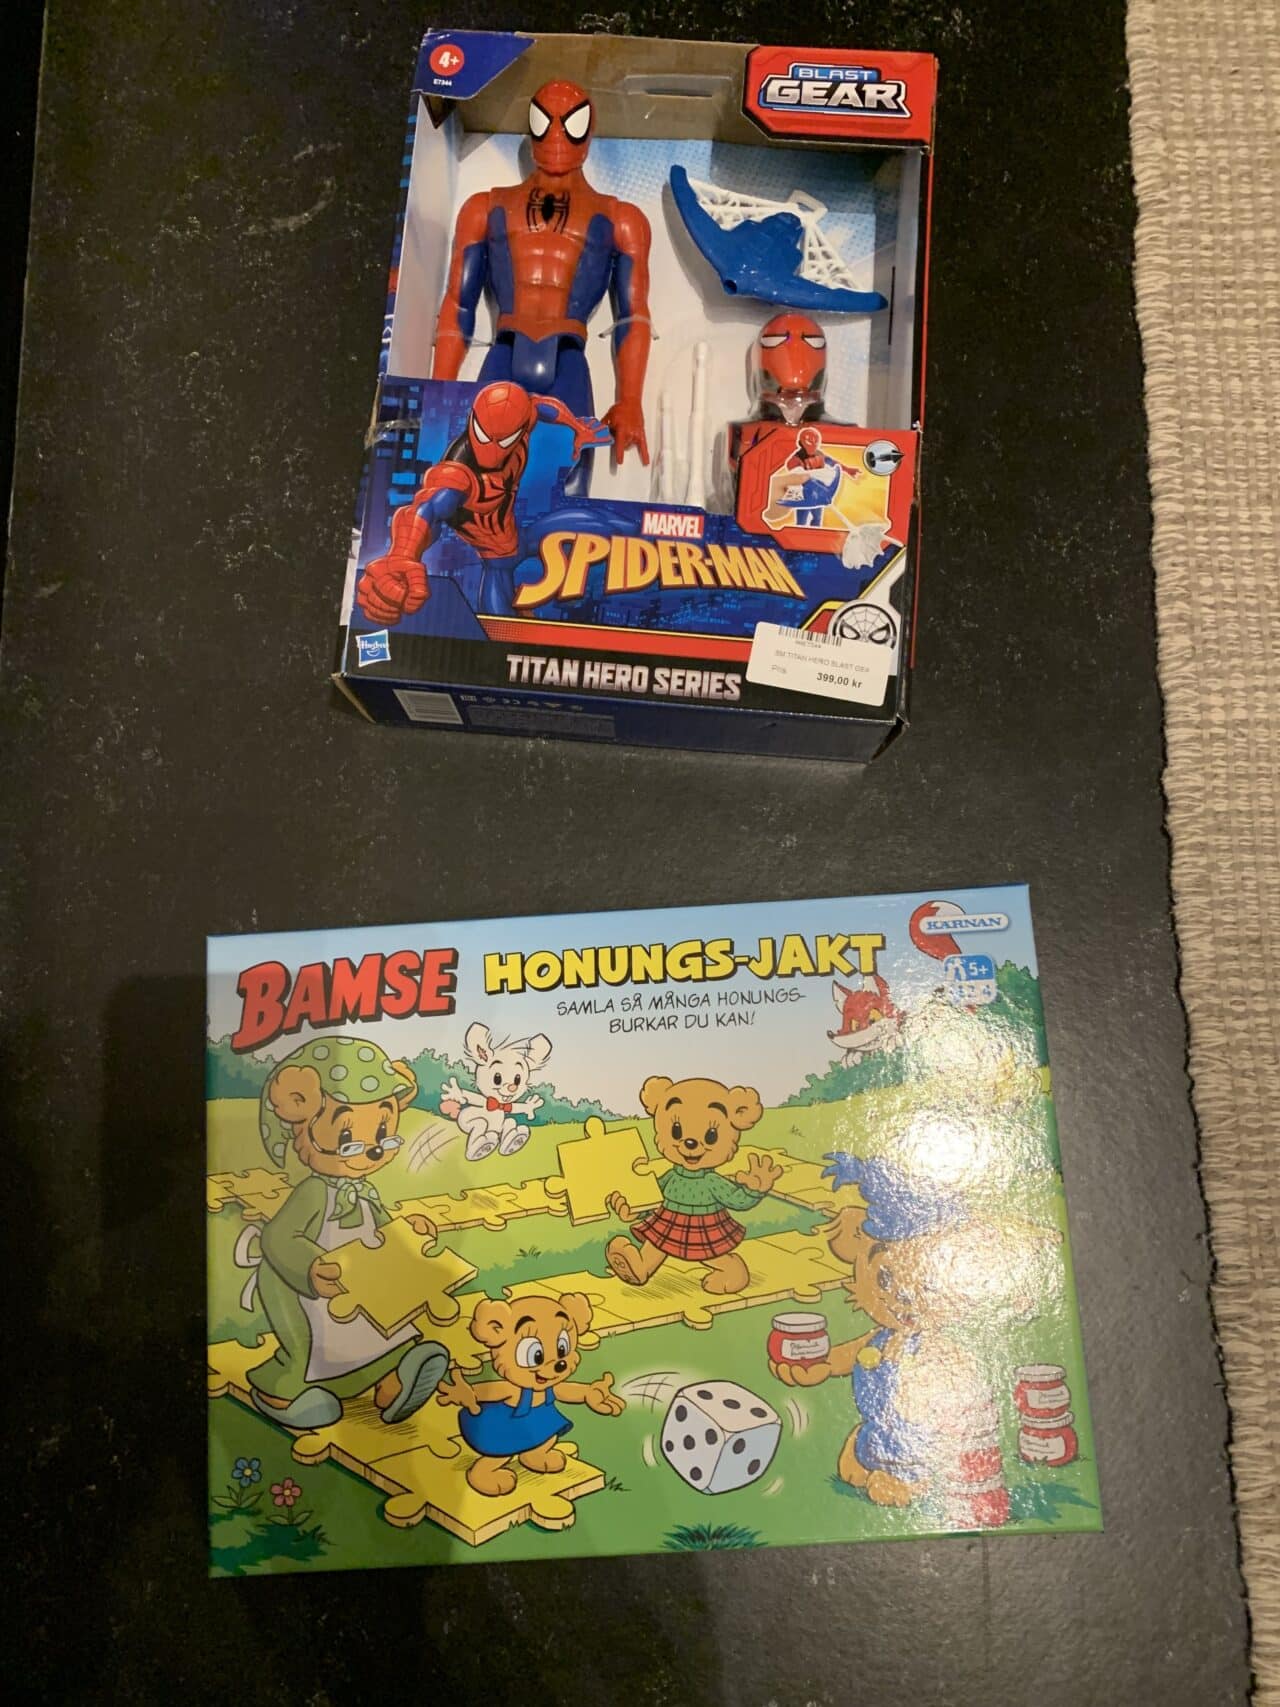 Spiderman Figurine Toy And Bamse Puzzle Game